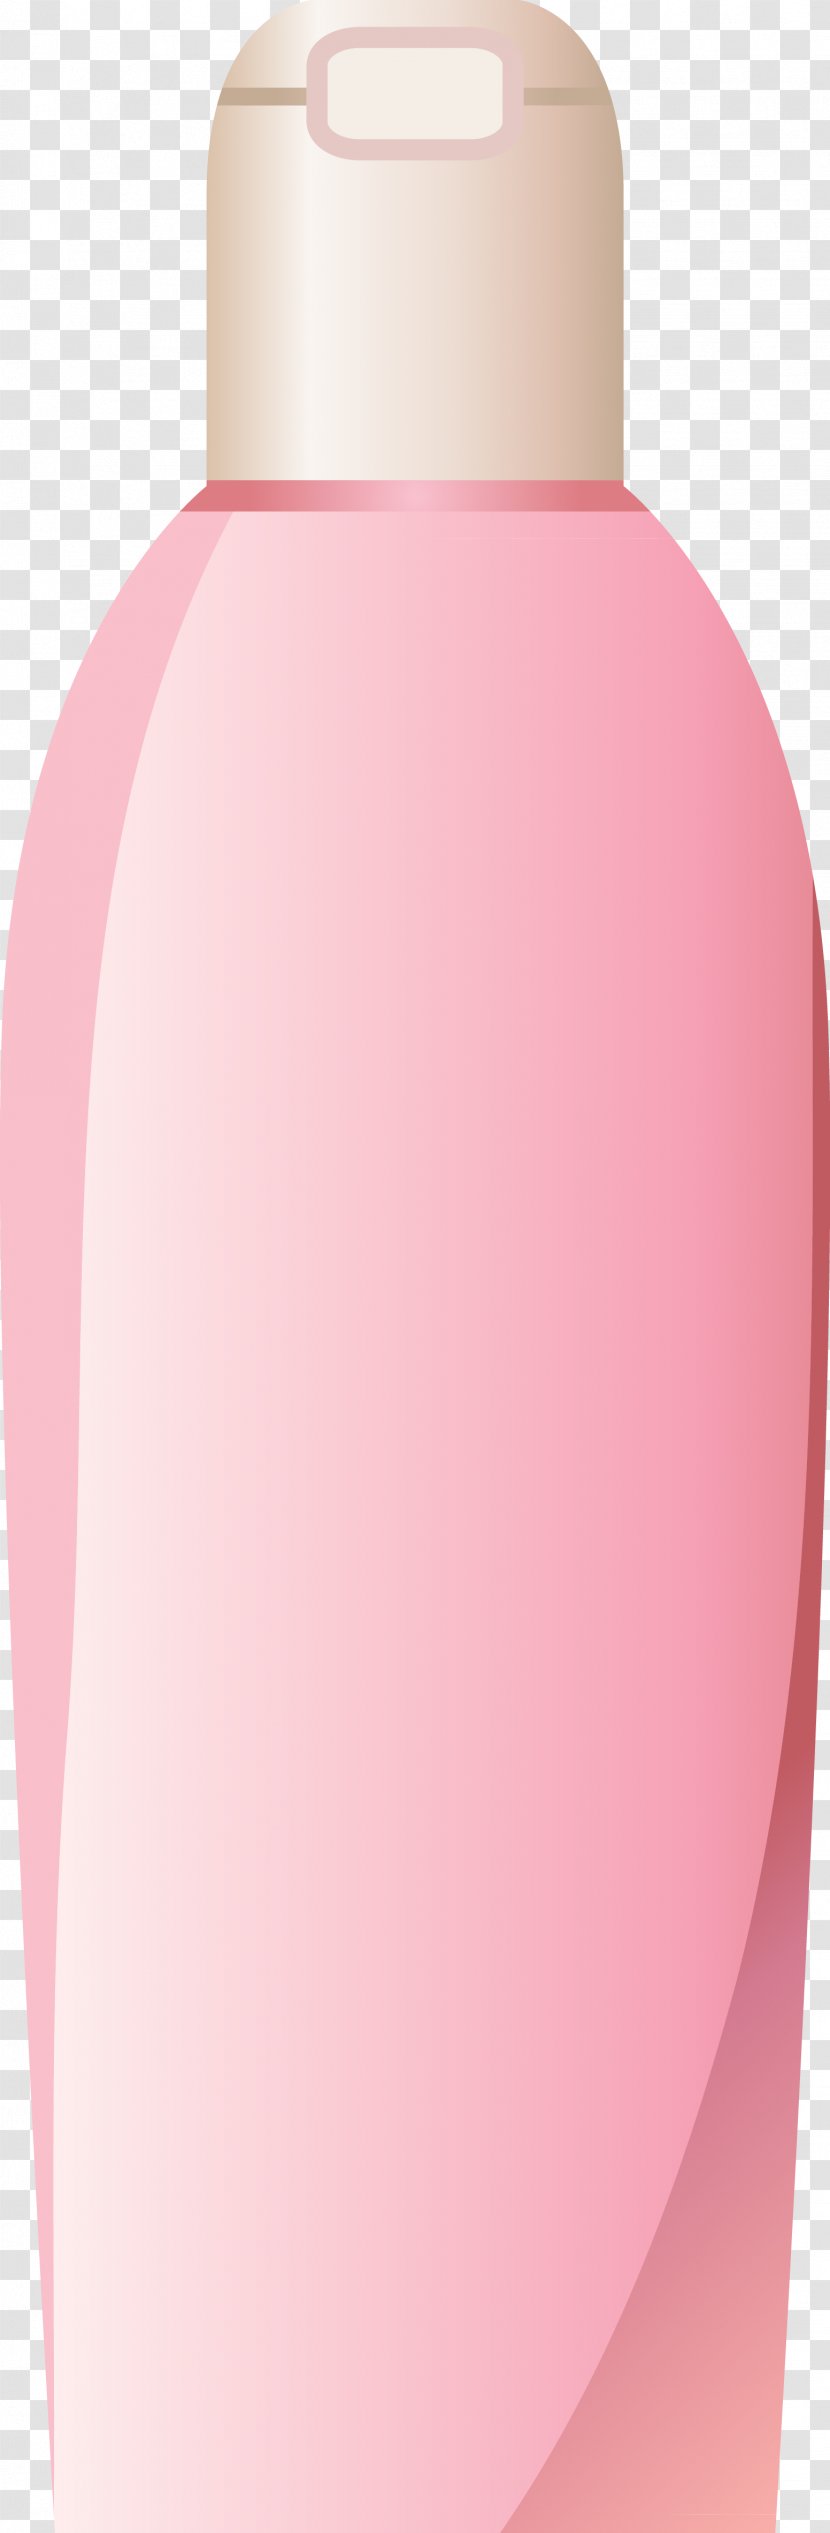 Oil Cleanser - COSMETICS Transparent PNG